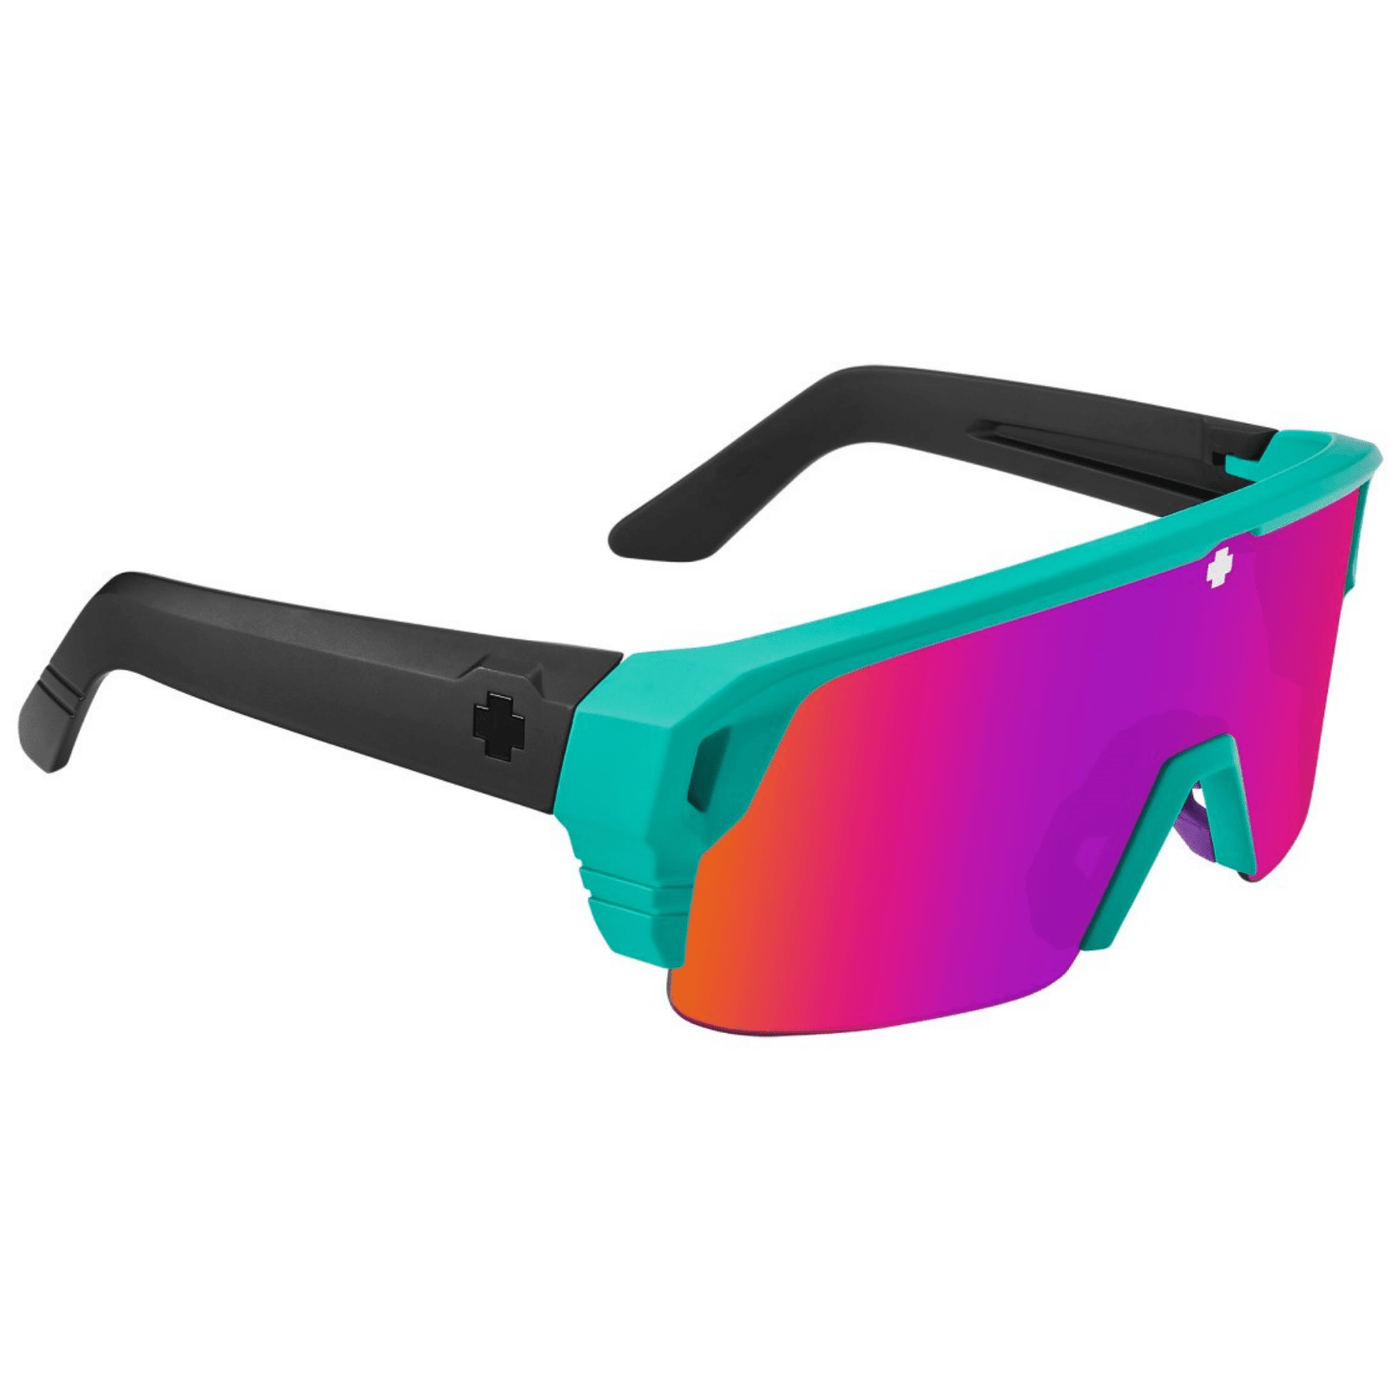 SPY MONOLITH 5050 Sunglasses, Happy Lens - Pink 8Lines Shop - Fast Shipping